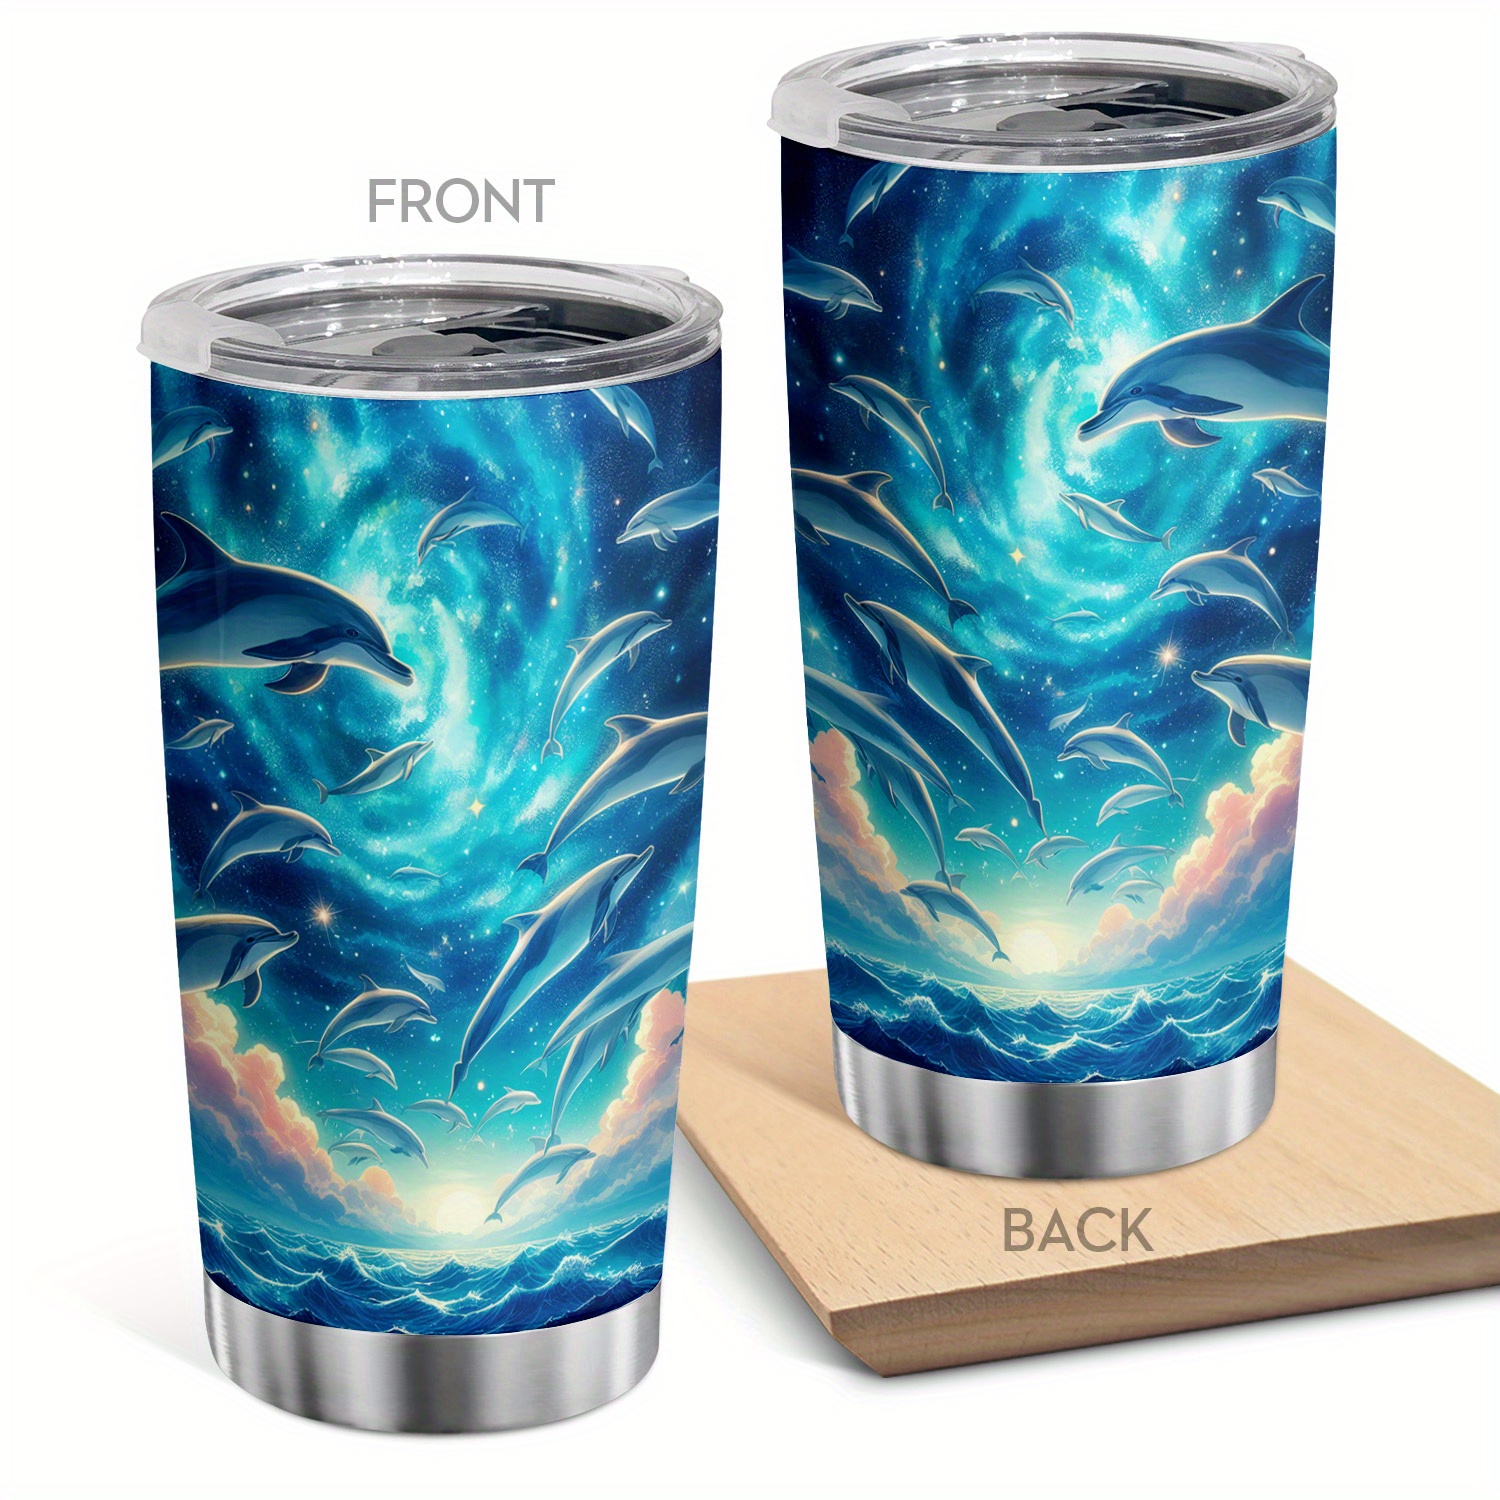 

1pc 20oz Sea World Tumbler Insulated Cup With Lid, Stainless Steel Travel Mug For Dolphin Lover, Double Wall Water Tumbler, Ice Coffee Mug